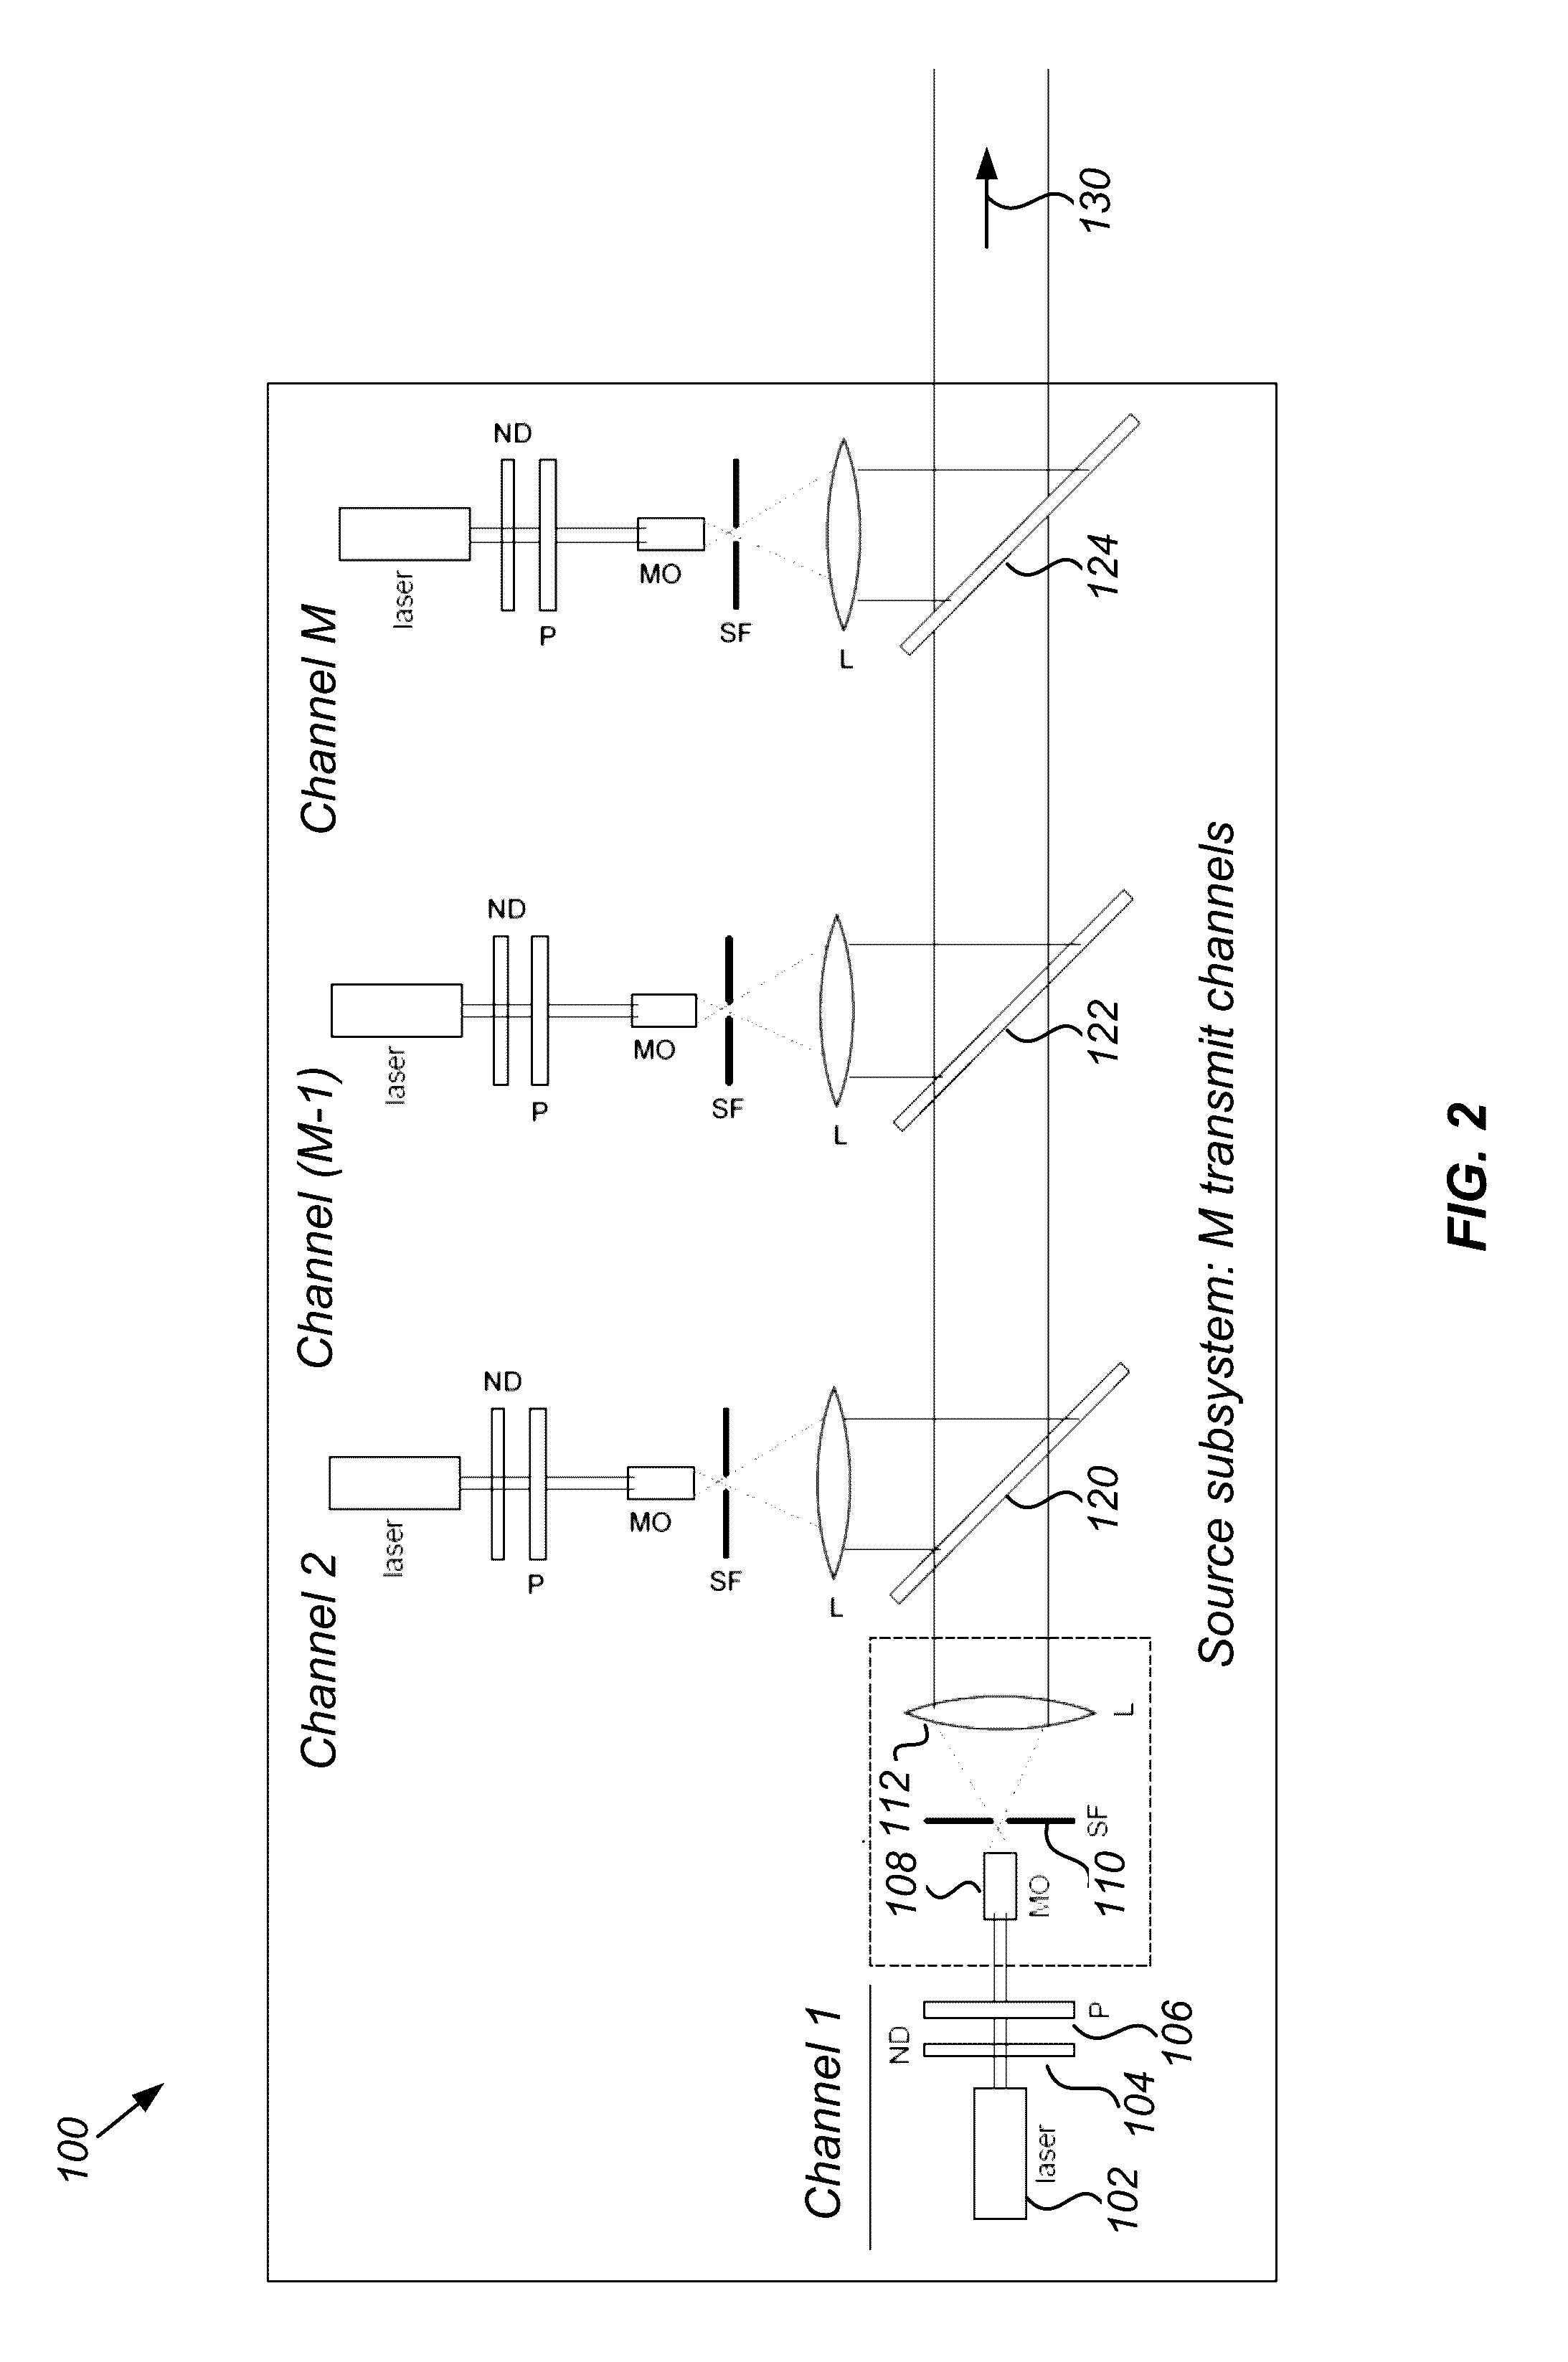 Atmospheric Channel Characterization System and Method Using Target Image Information